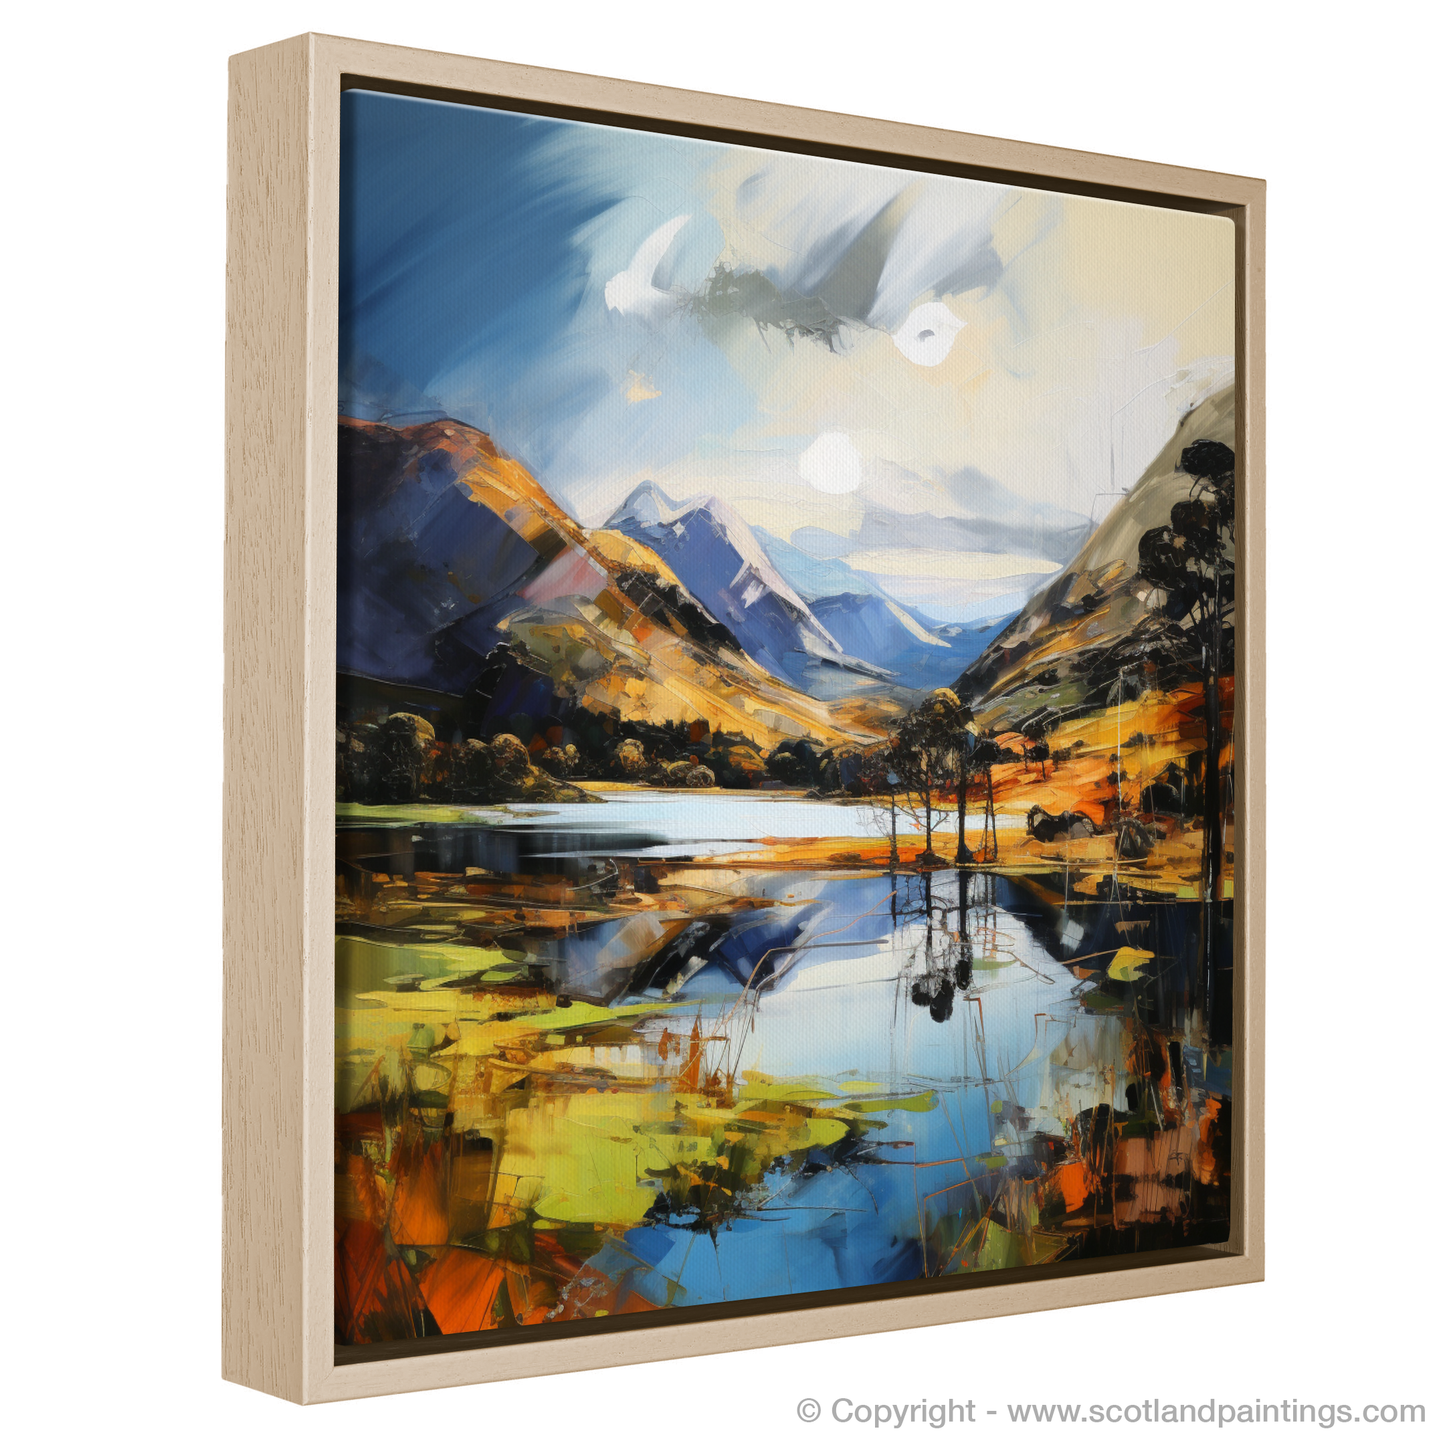 Painting and Art Print of Loch Shiel, Highlands entitled "Highland Majesty: An Expressionist Homage to Loch Shiel".